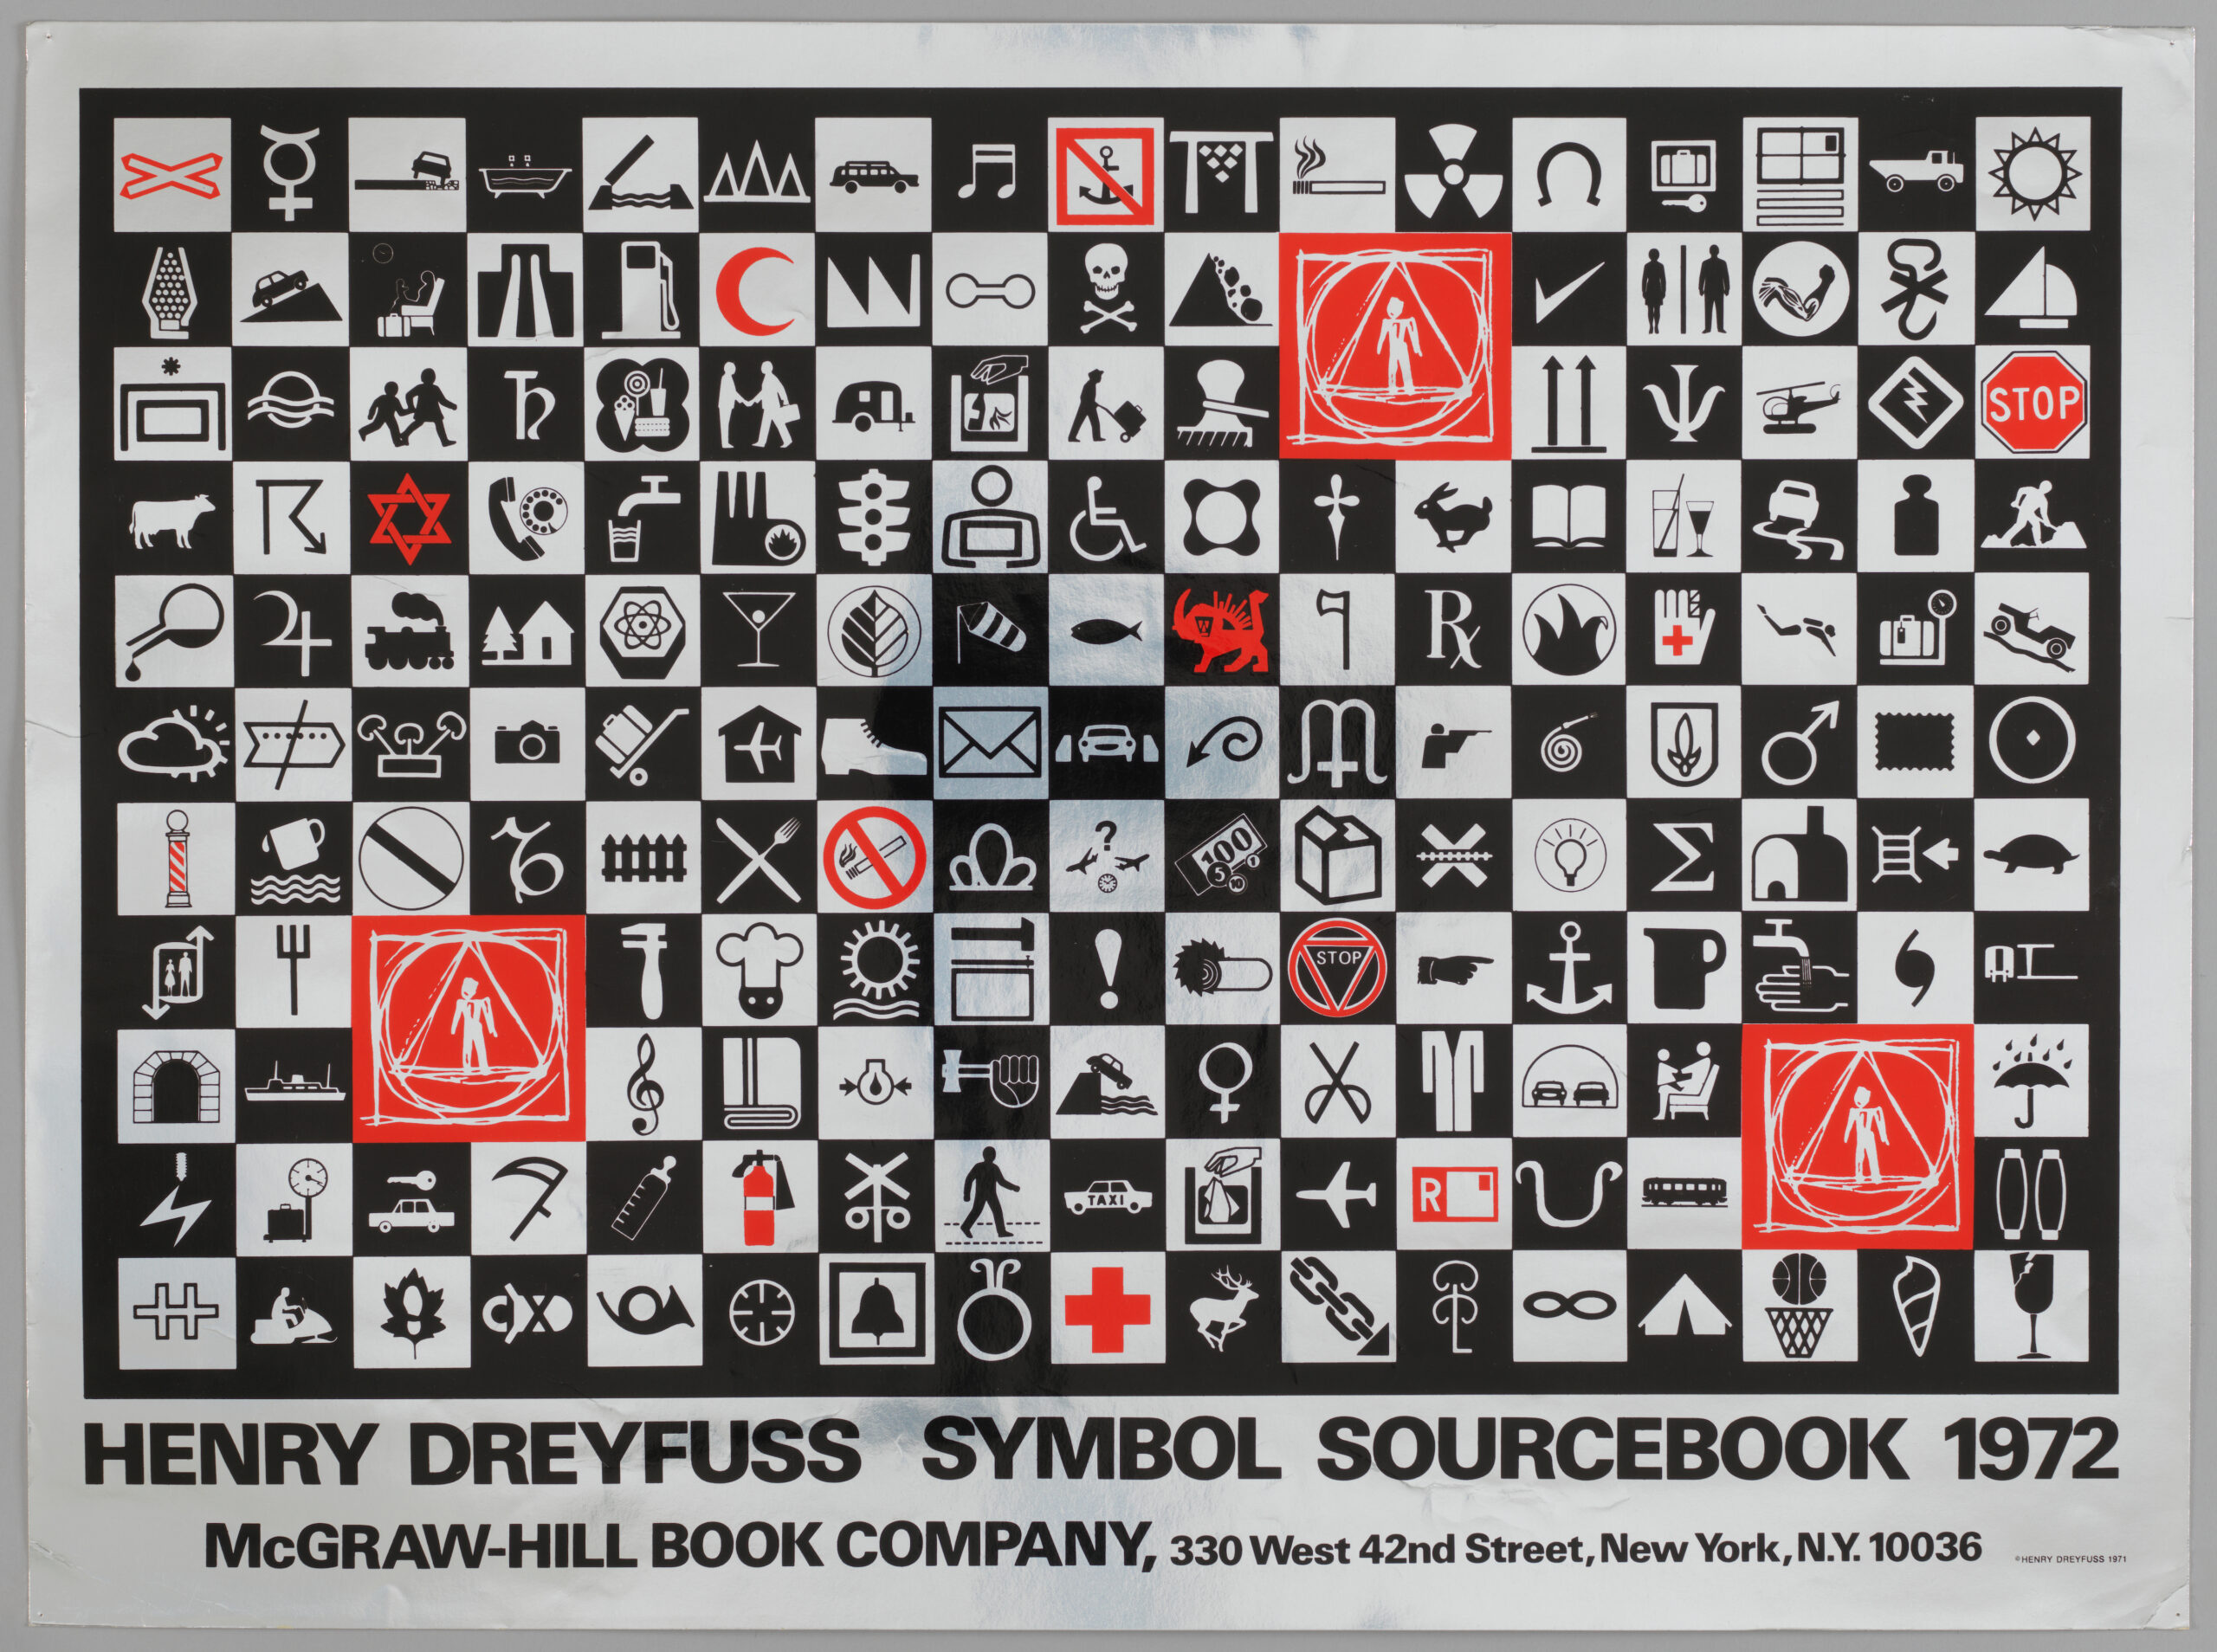 A horizontal poster titled [Henry Dreyfuss Symbol Sourcebook 1972] featuring a black and white checkered grid of symbols with red accents.